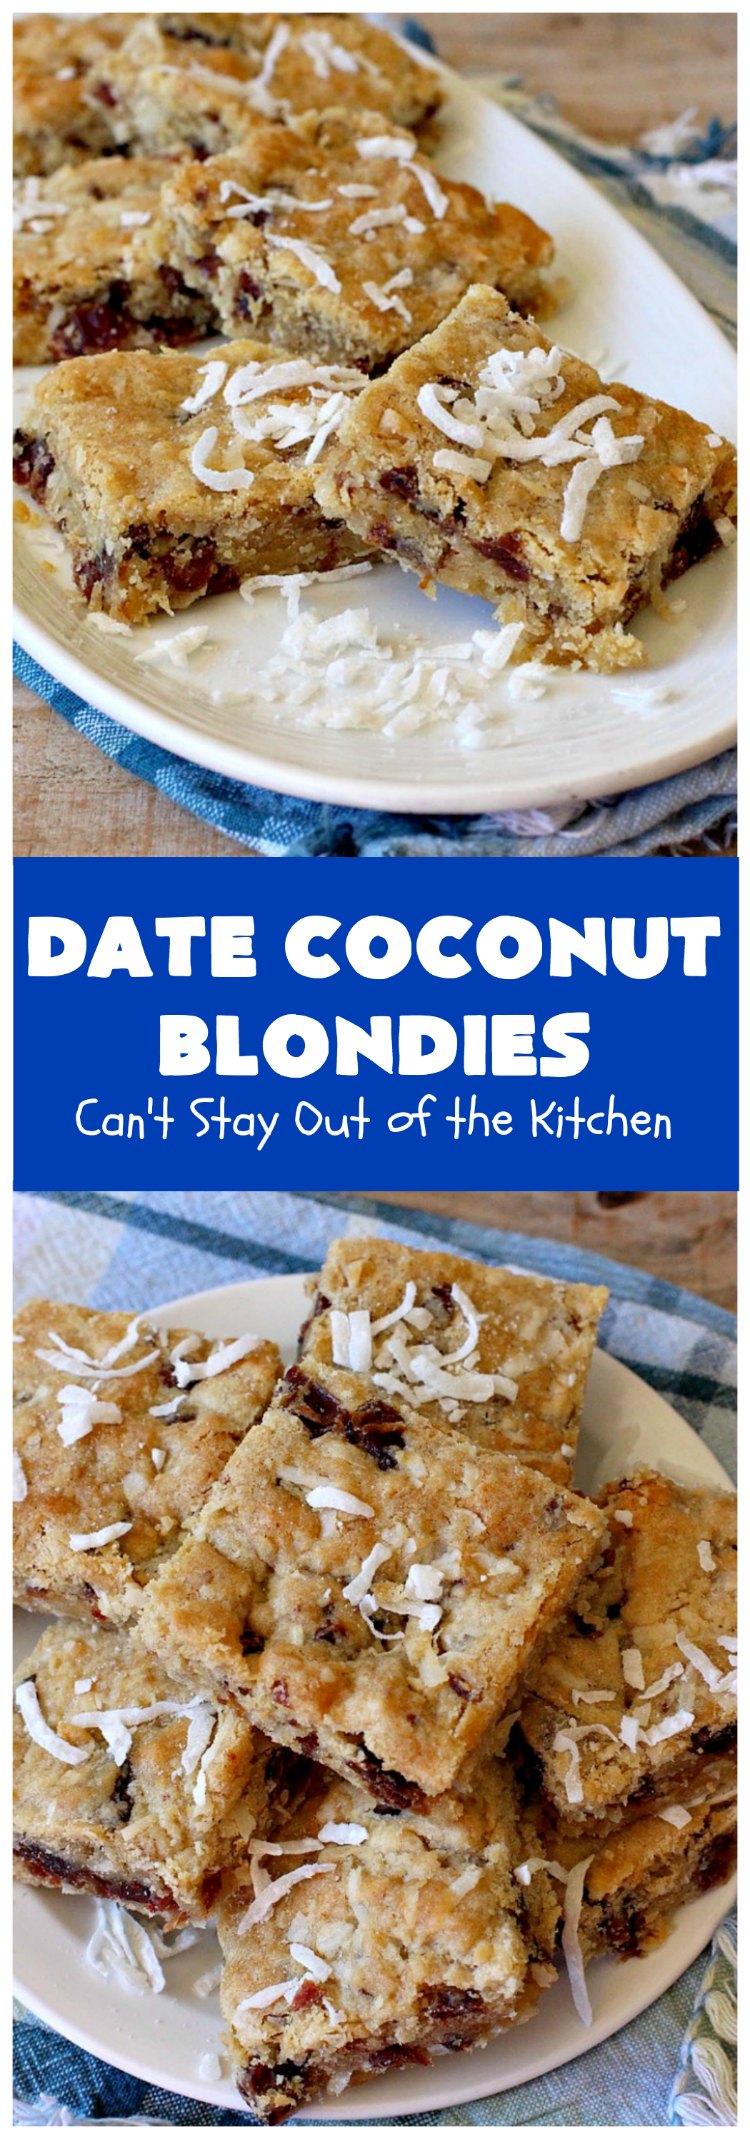 Date Coconut Blondies | Can't Stay Out of the Kitchen | these fantastic #cookies will knock your socks off! If you enjoy #dates & #coconut, this delicious #dessert is perfect for #tailgating parties, potlucks or soccer practice. Every bite will have you drooling! #DateCoconutBlondies 